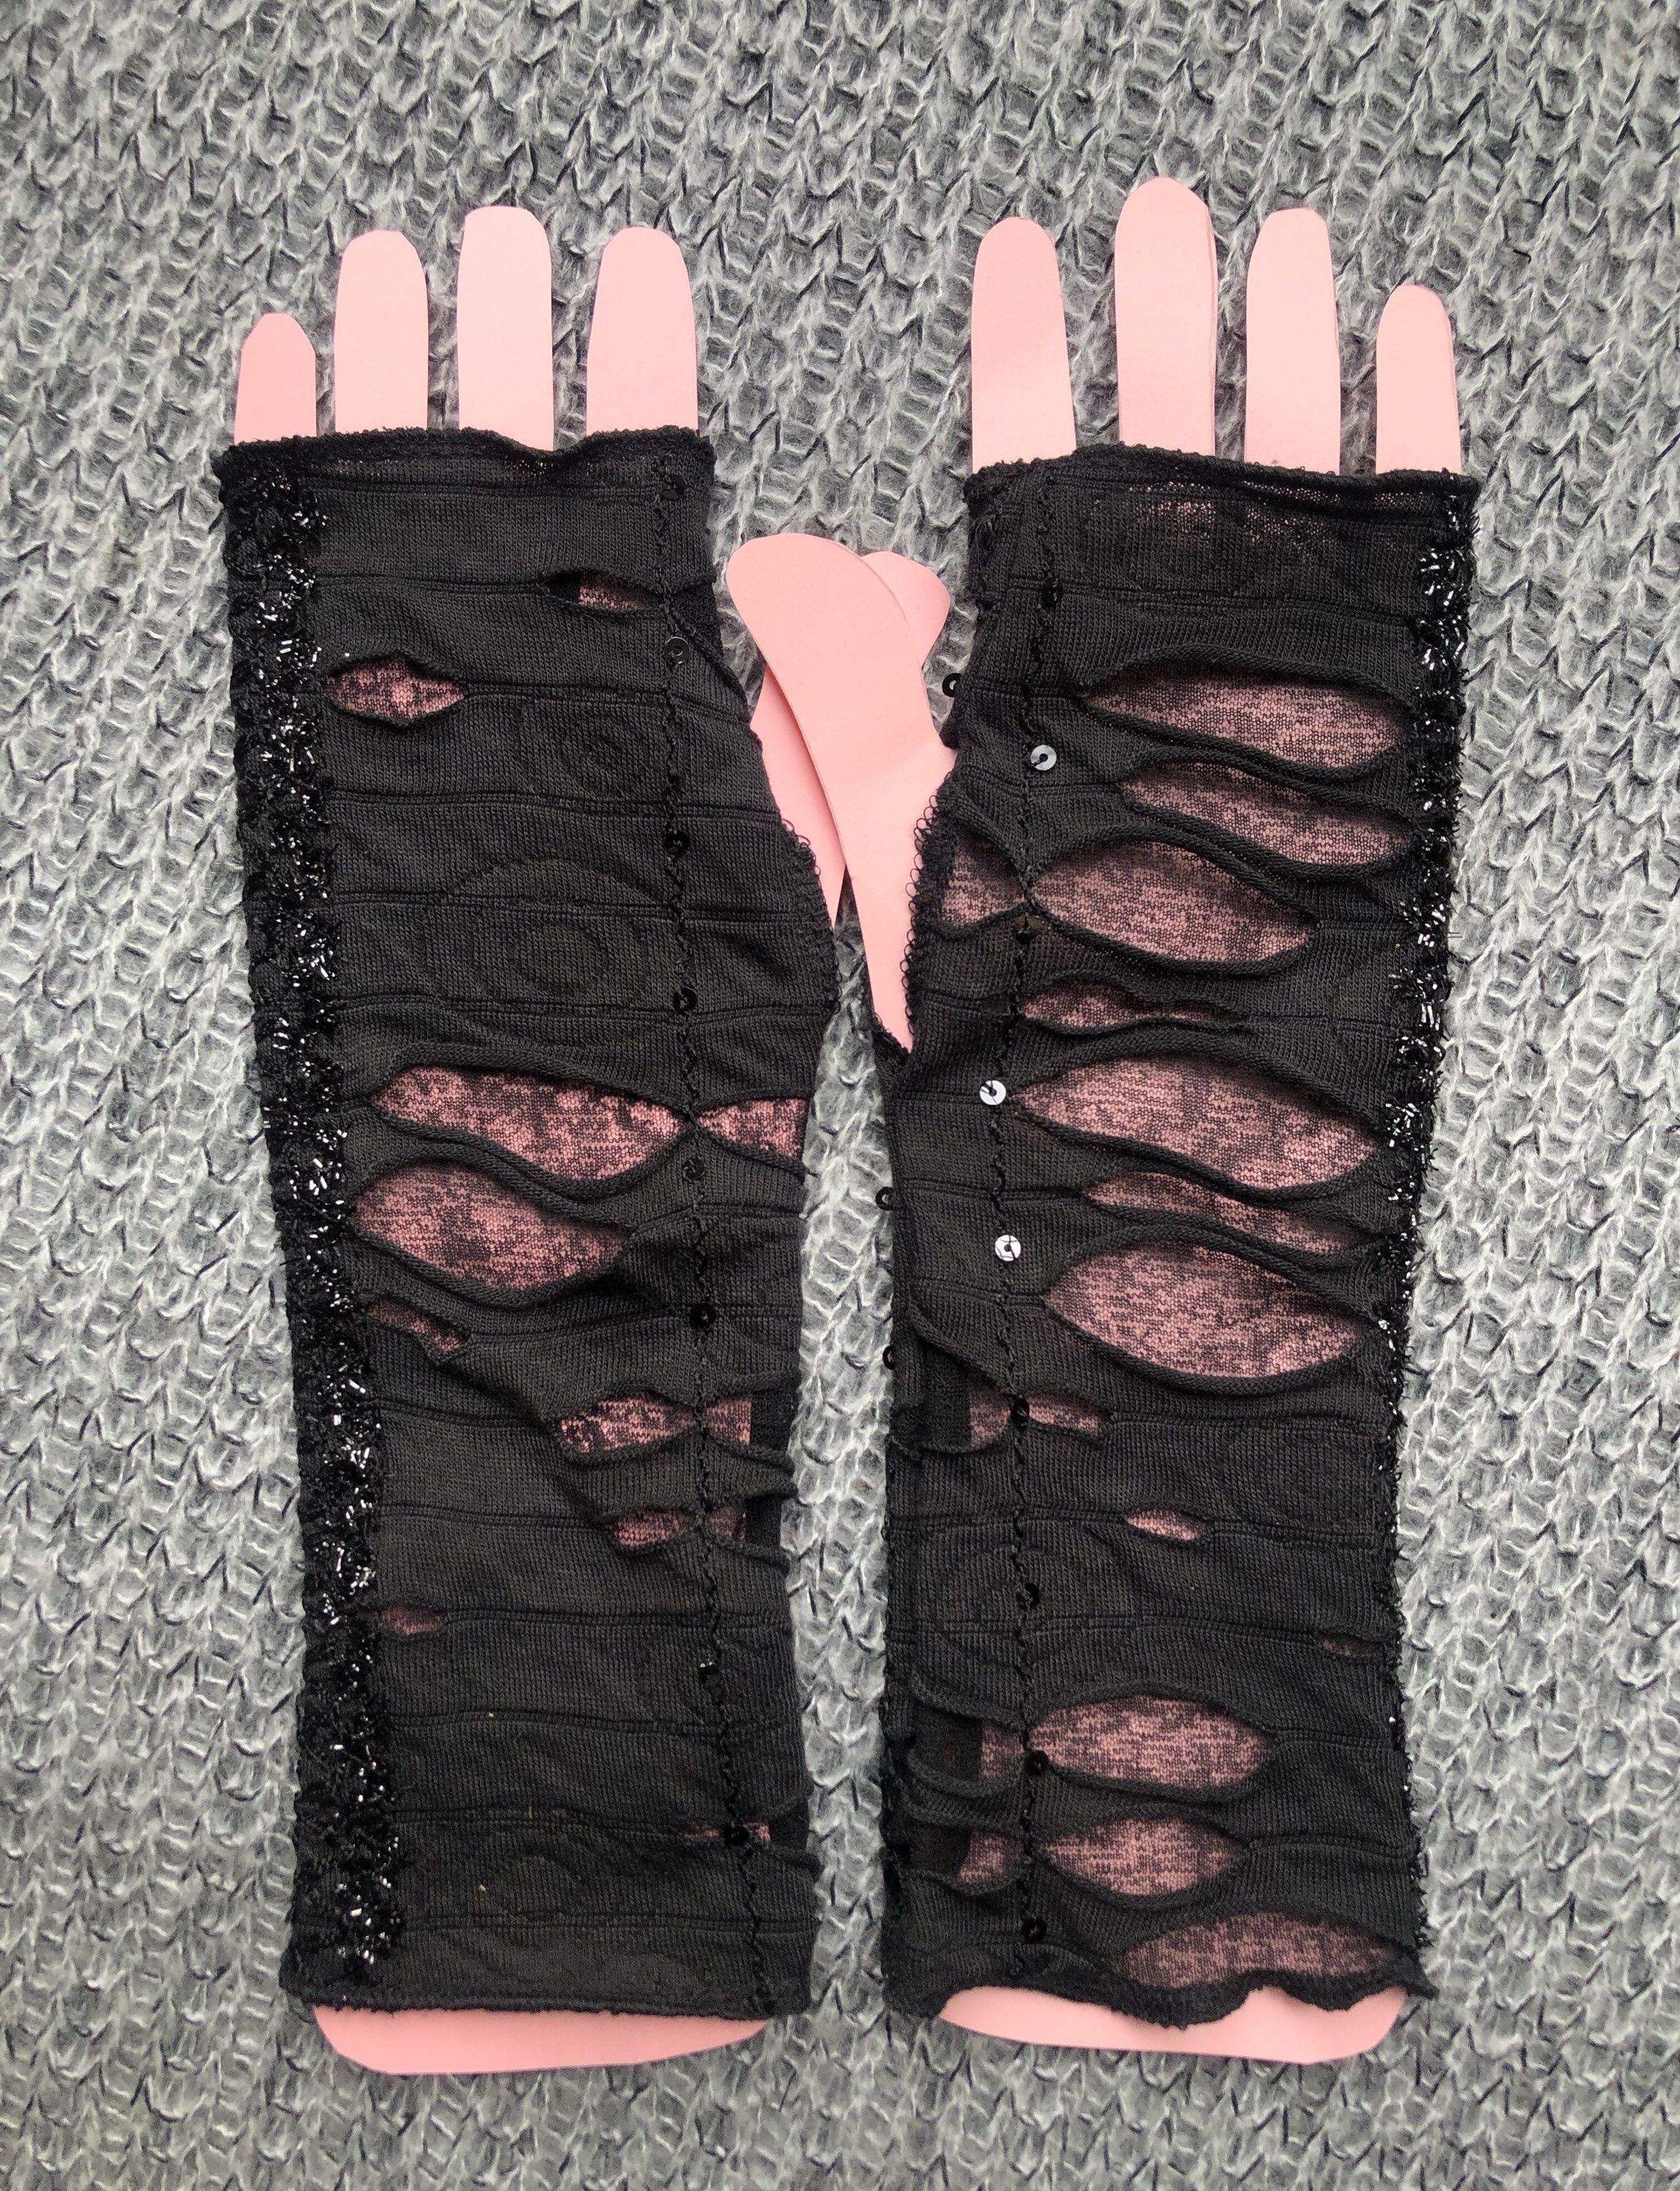 Black arm warmers long length Accessories Gloves & Mittens Arm Warmers handmade dark fashion sparkle witchy stretch mesh fingerless gloves goth girl 